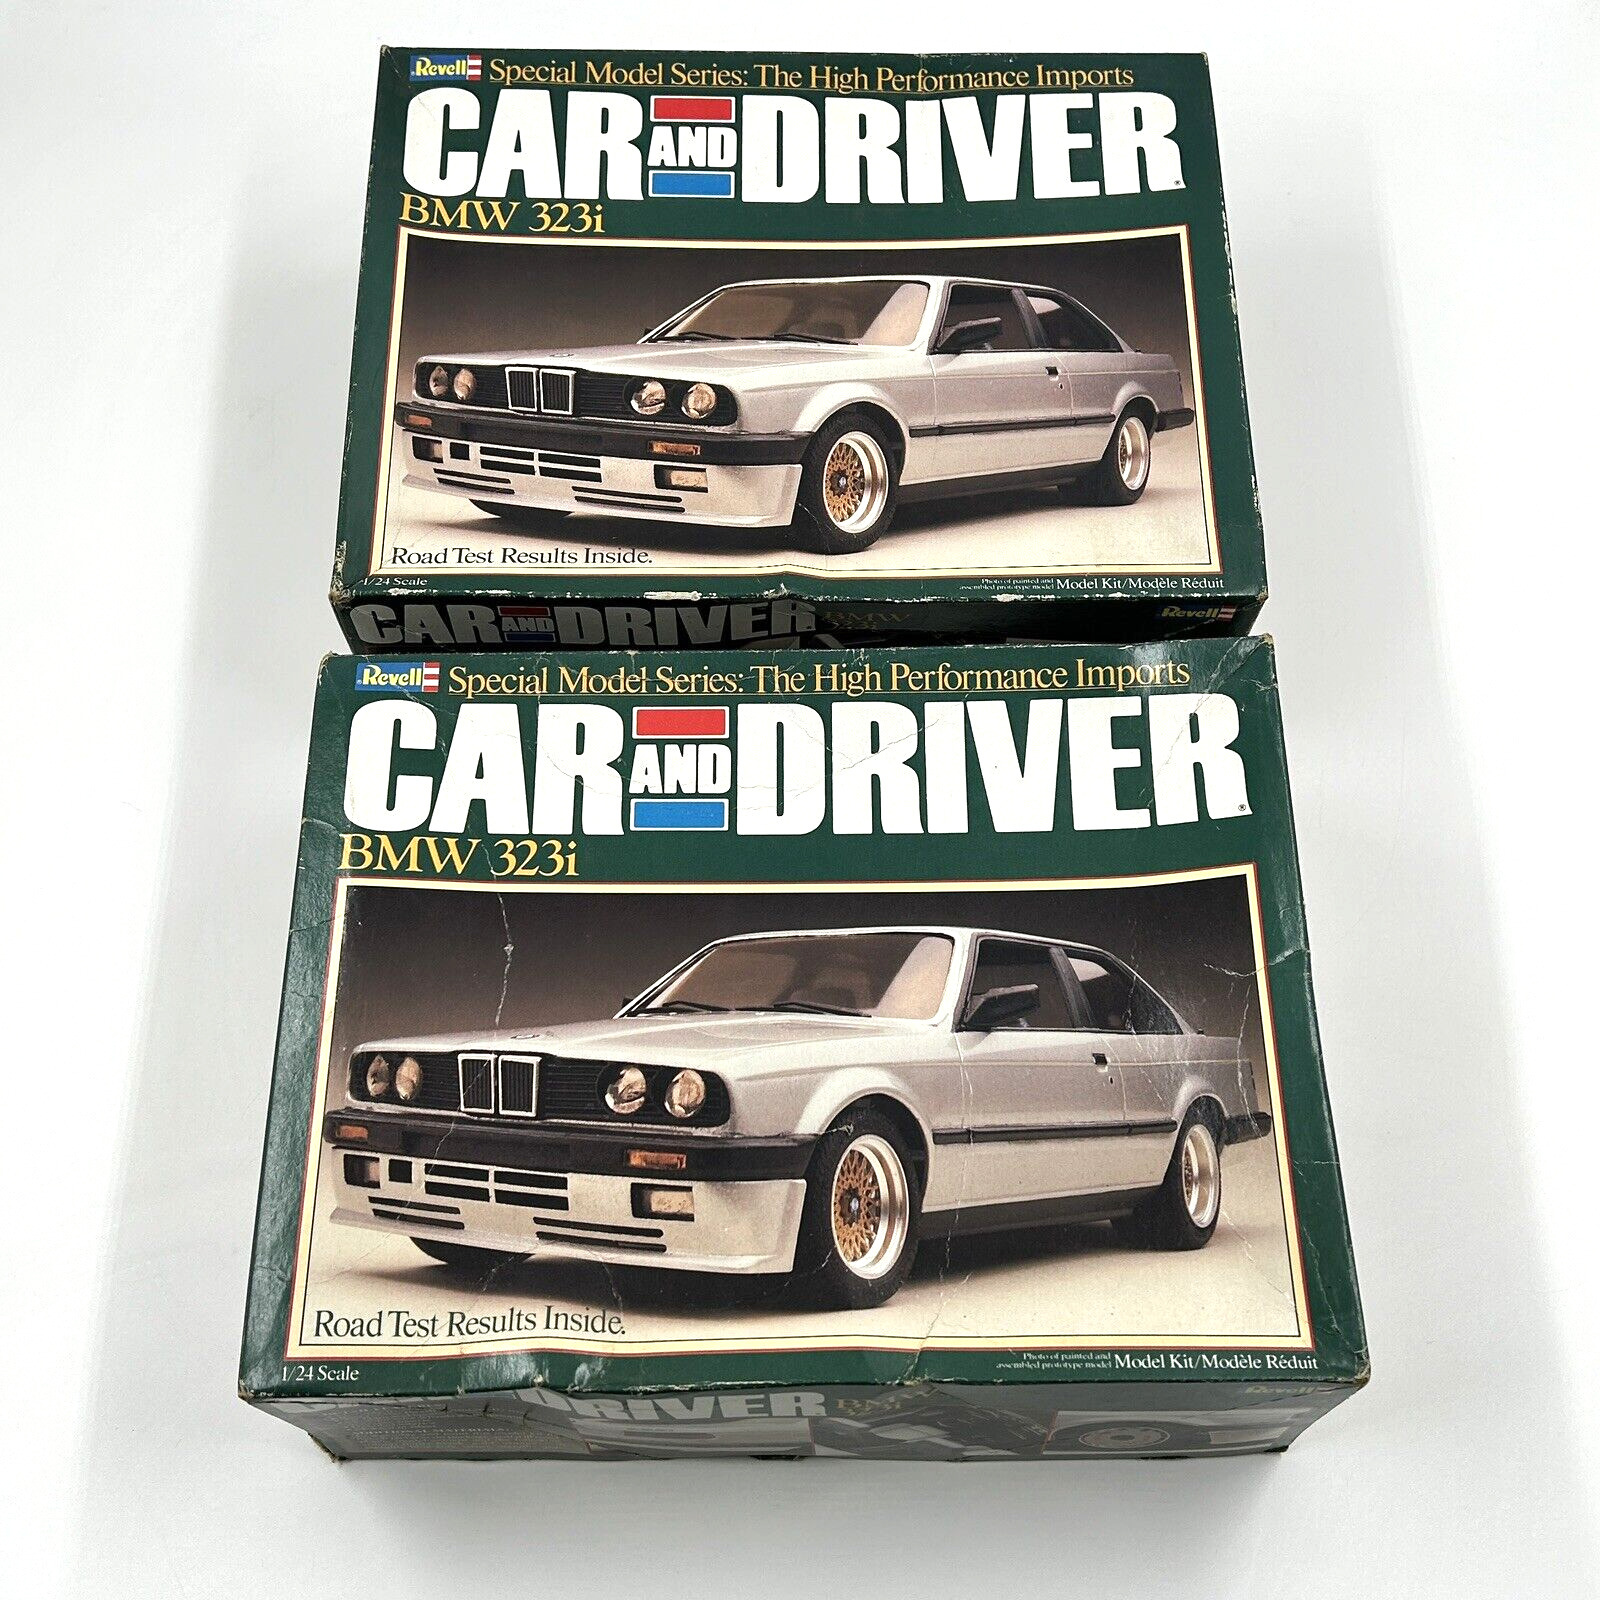 Car And Driver Special Model series Bmw 323i revell 1/24 model kit Lot Read